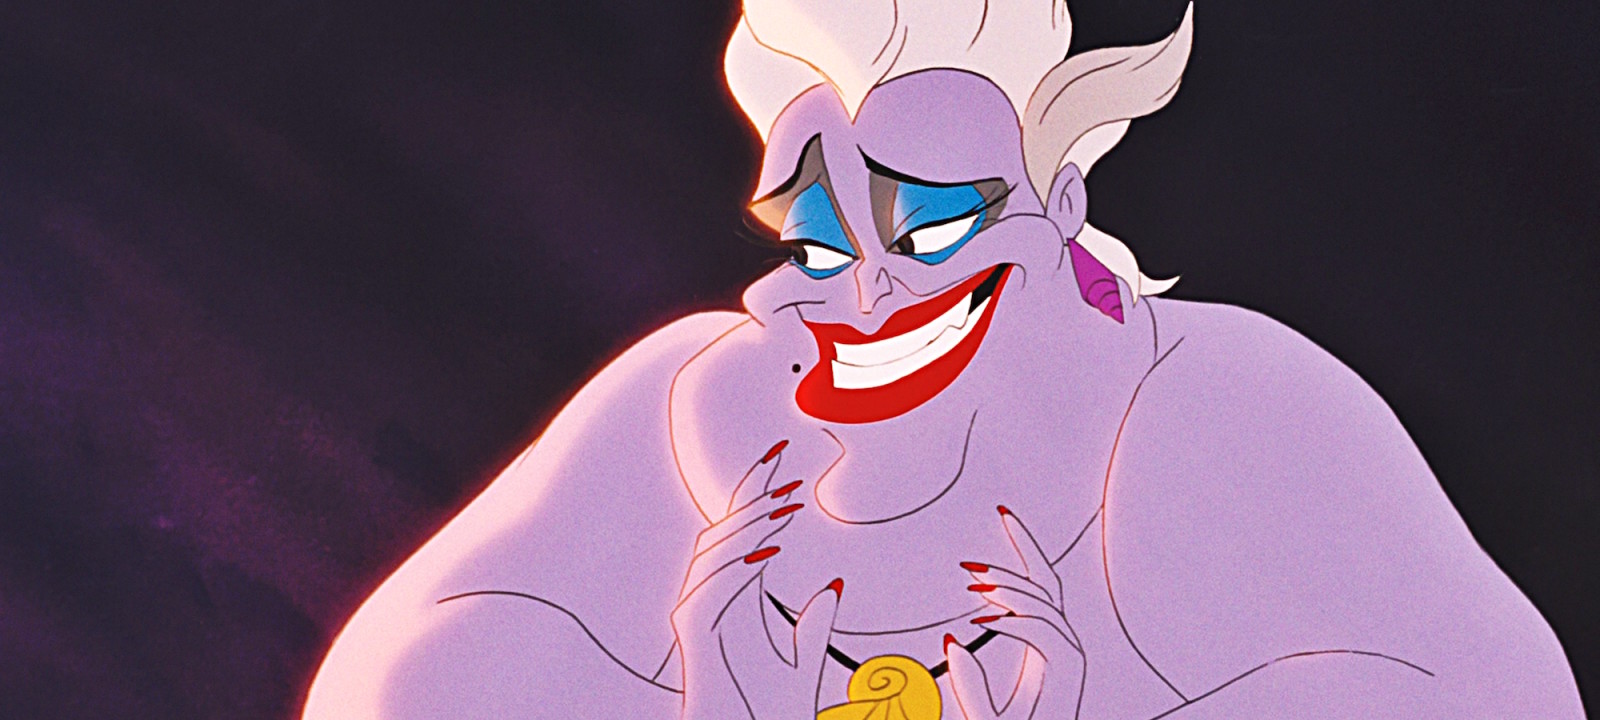 WATCH Rebel Wilson Performs as Ursula in ‘The Little Mermaid Live